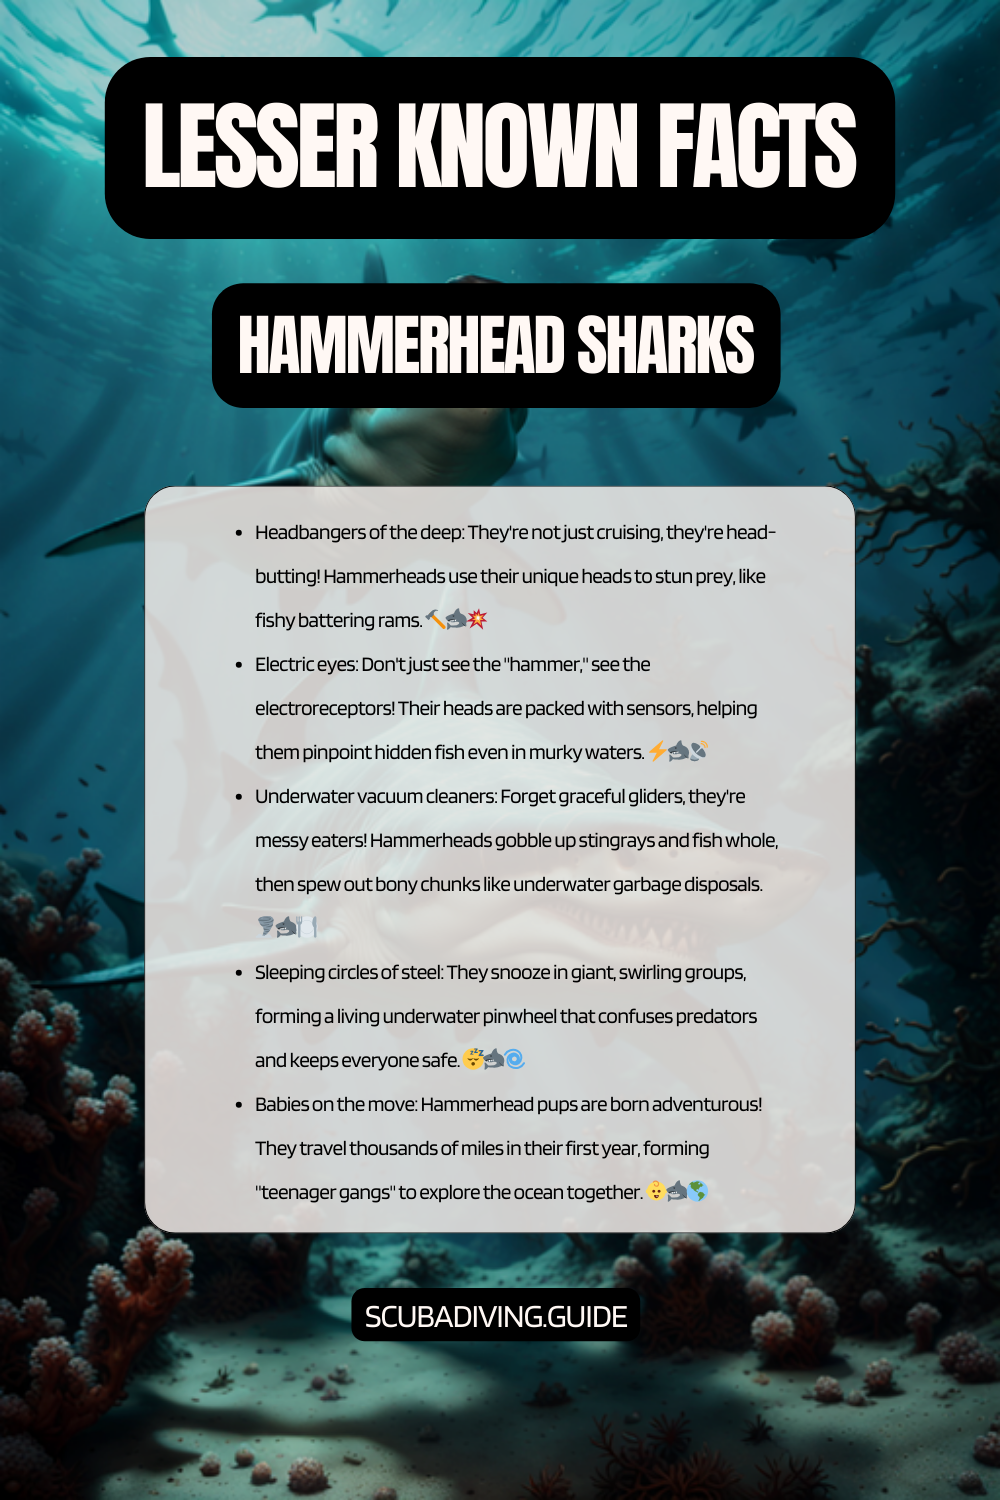 lesser known facts hammerhead sharks